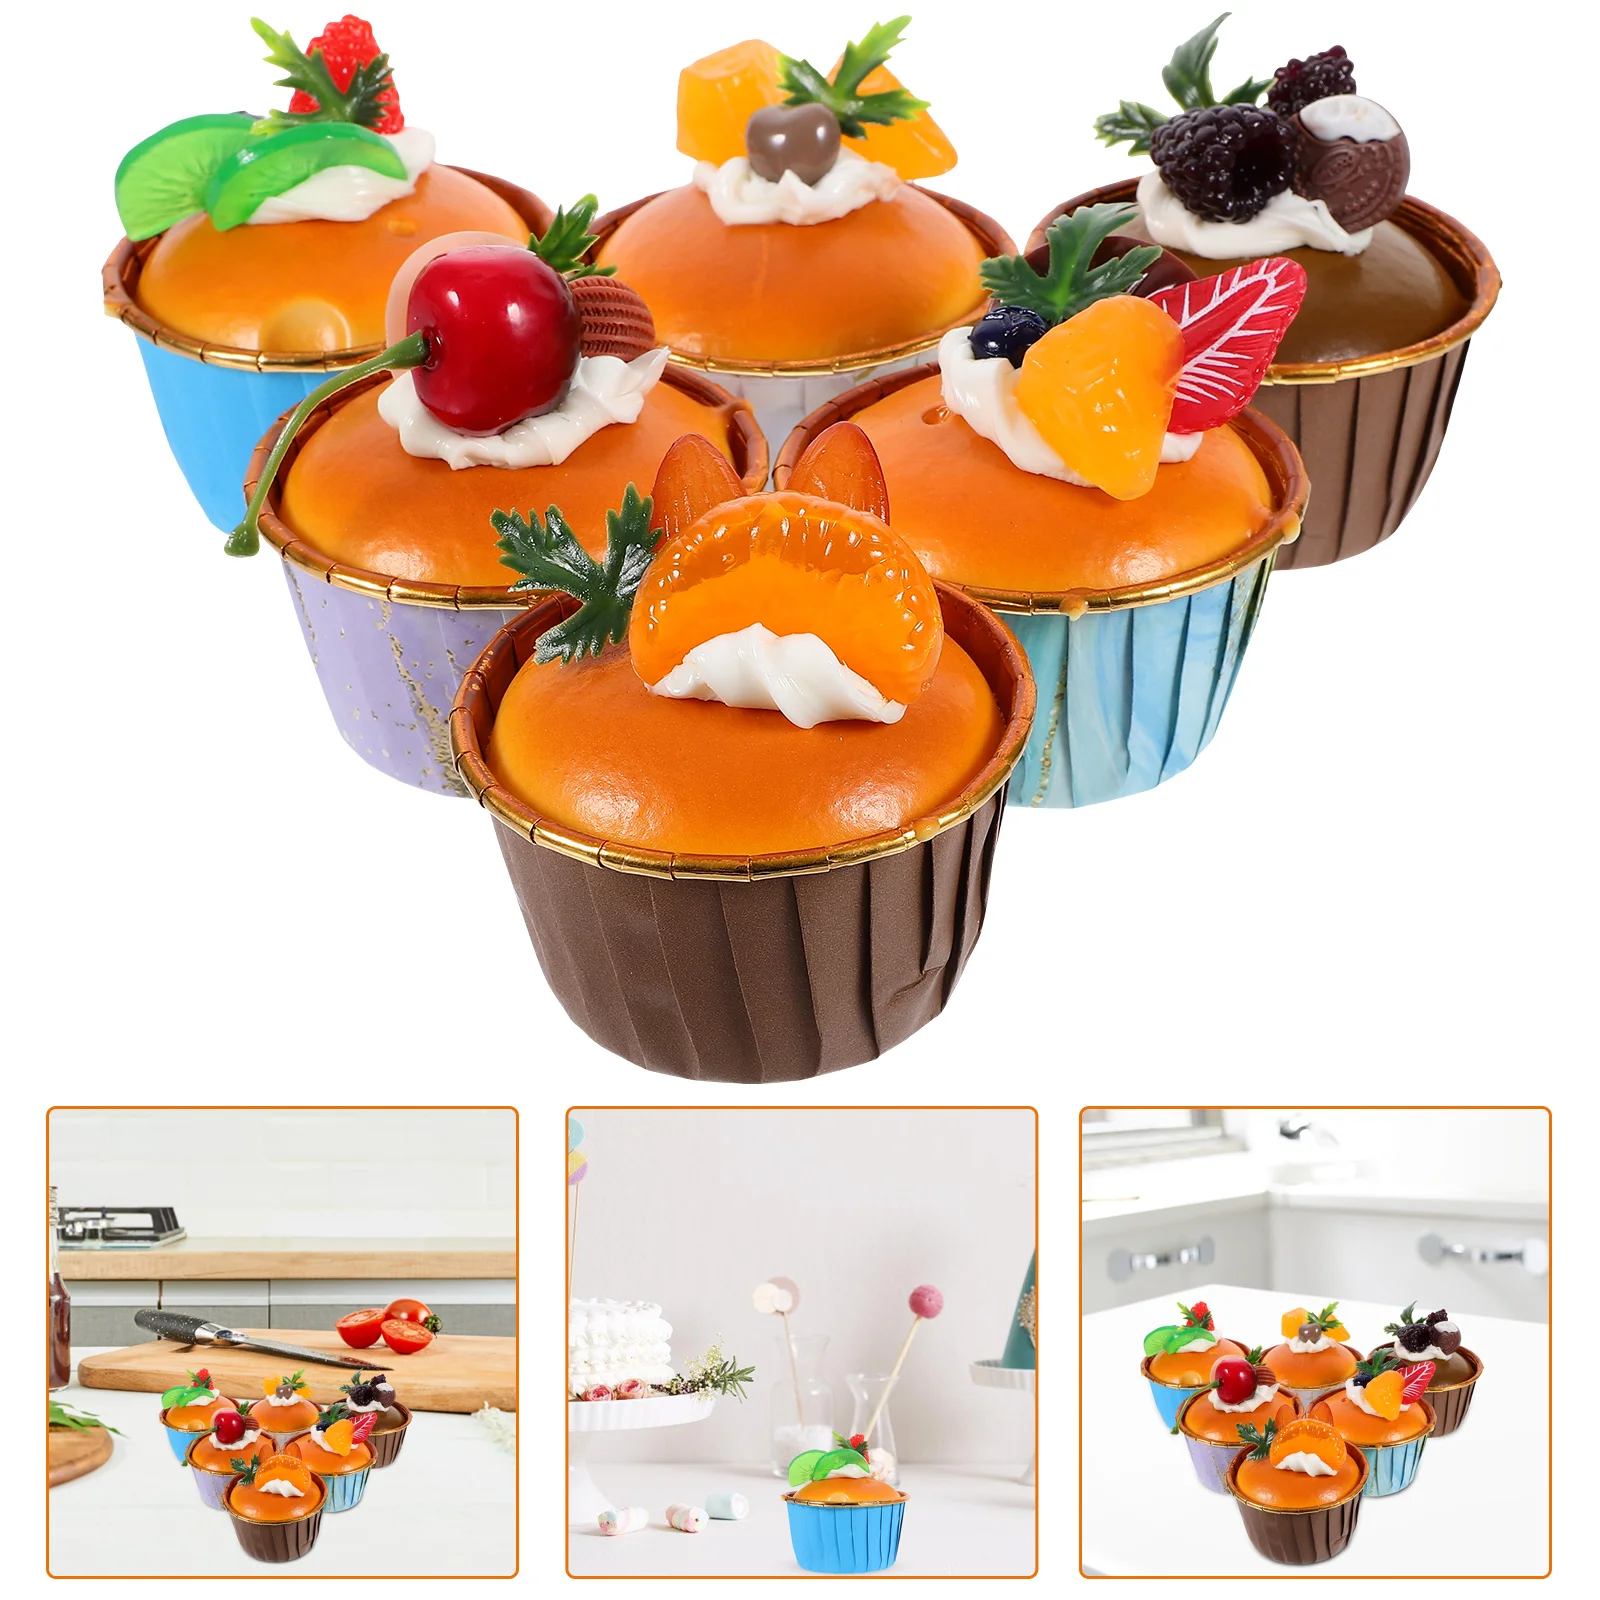 

Fake Cakes Tabletop Decor Reliable Artificial Cupcake Model Delicate Models Home Decors Lifelike Paper Cups